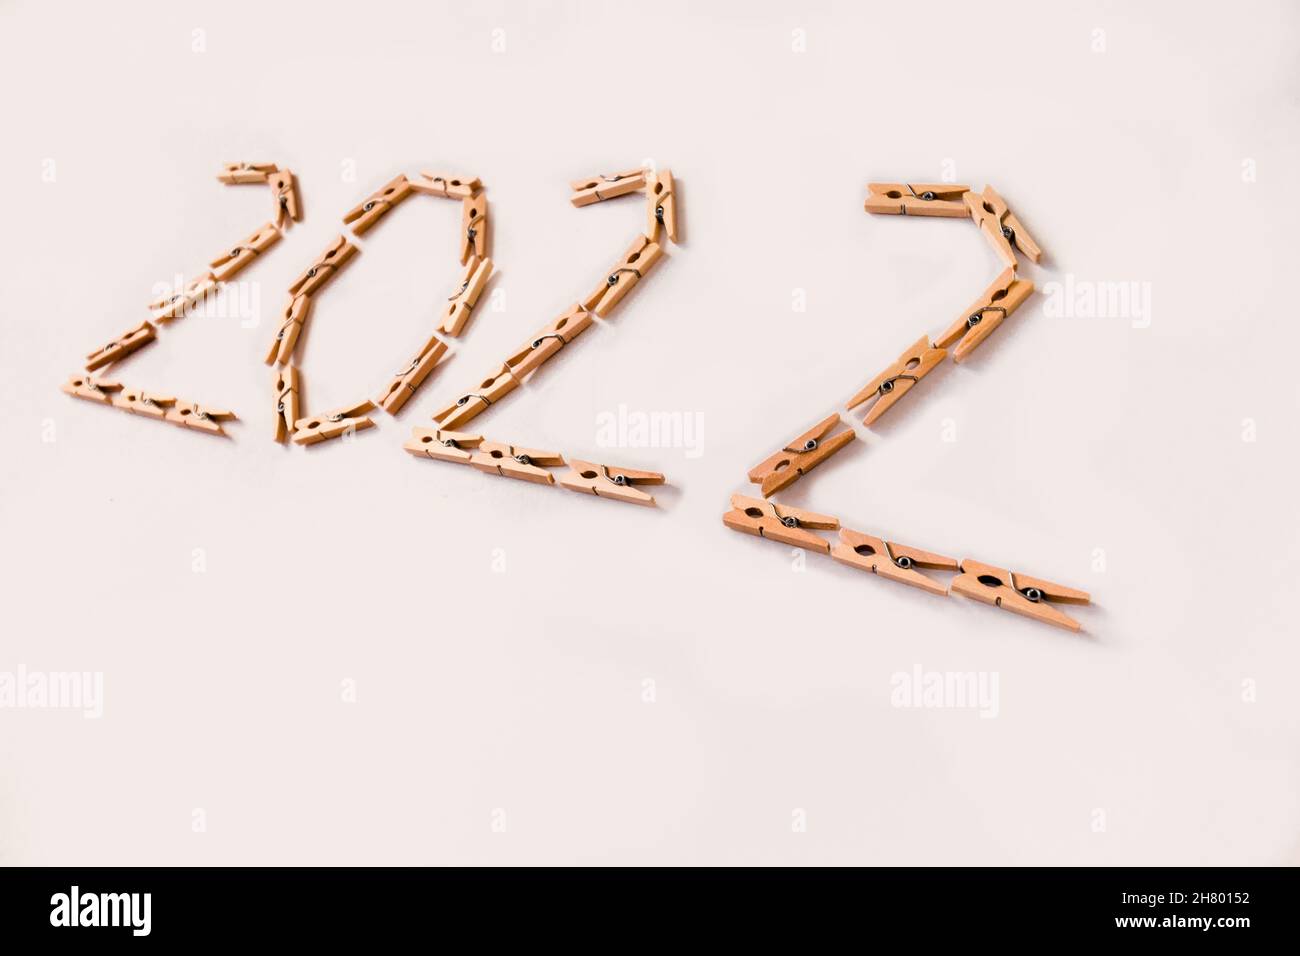 Number 2022 is made of small wooden clothespins on a white background. Stock Photo